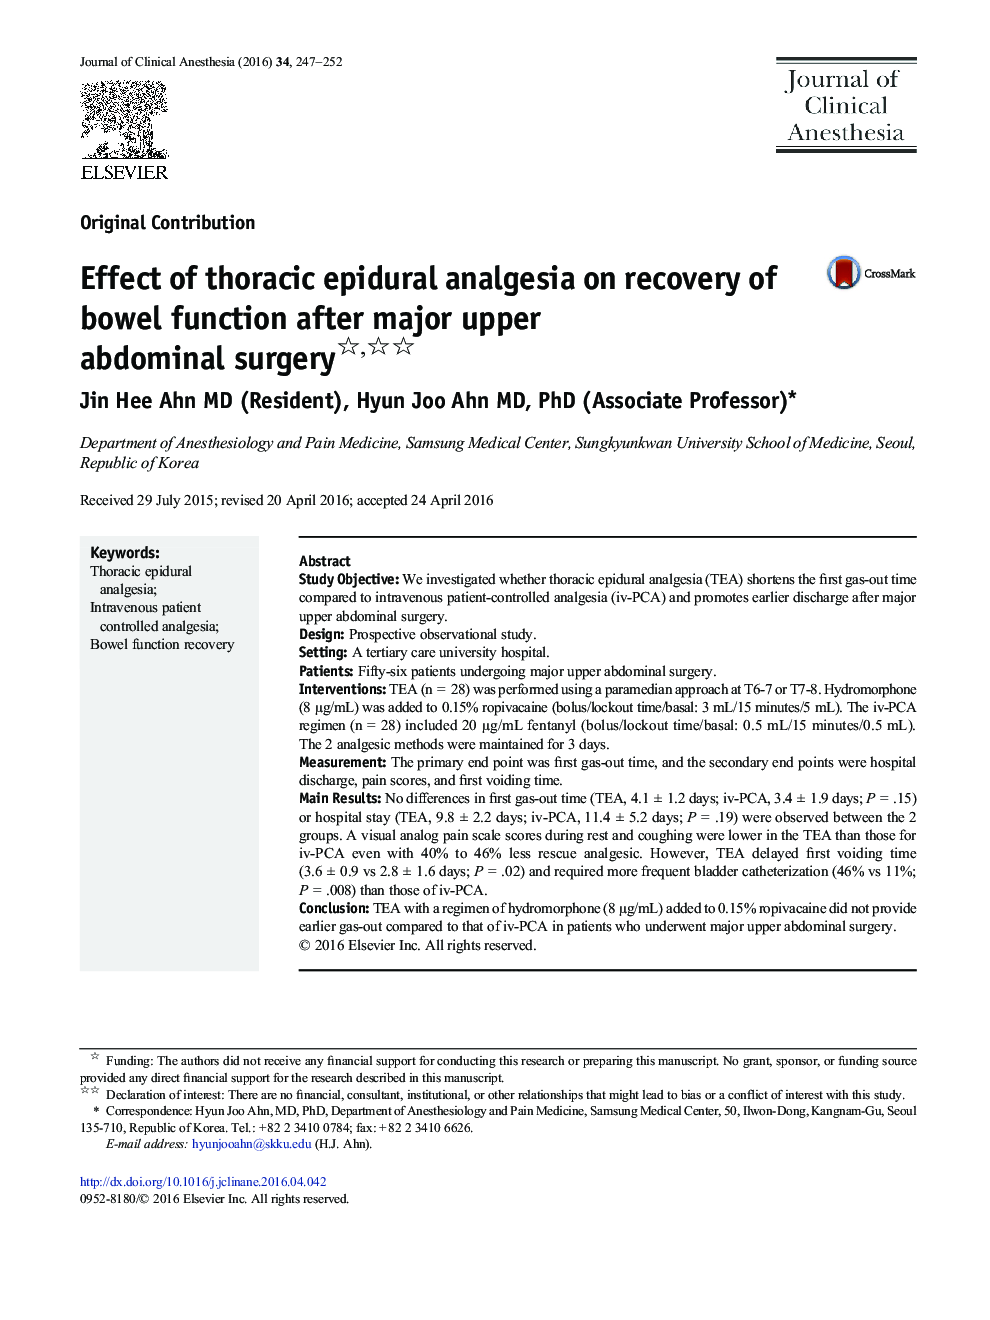 Original ContributionEffect of thoracic epidural analgesia on recovery of bowel function after major upper abdominal surgery